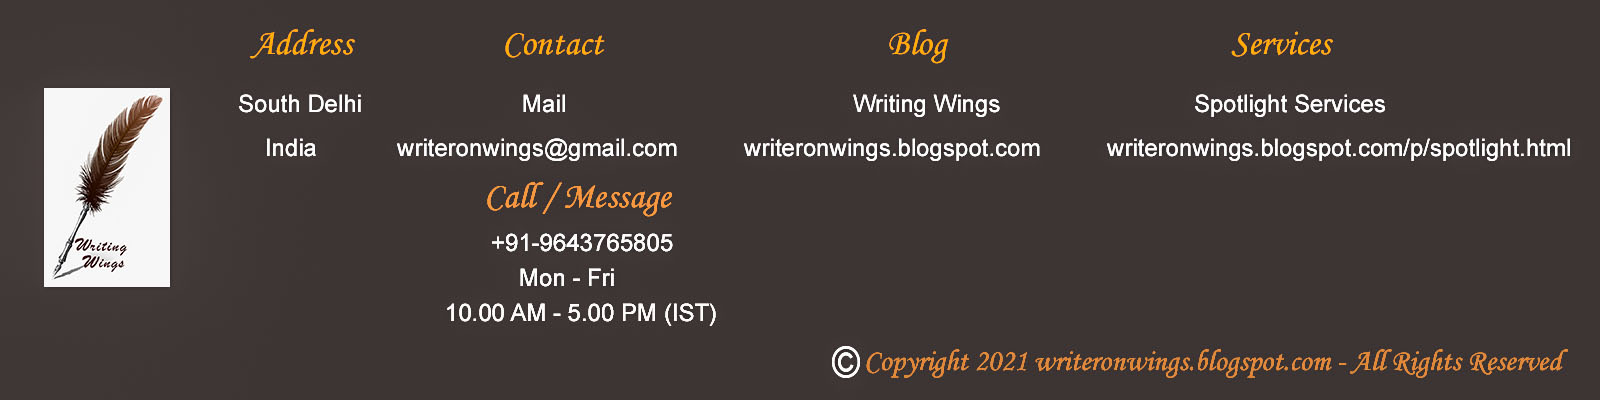 Footer | Writing Wings